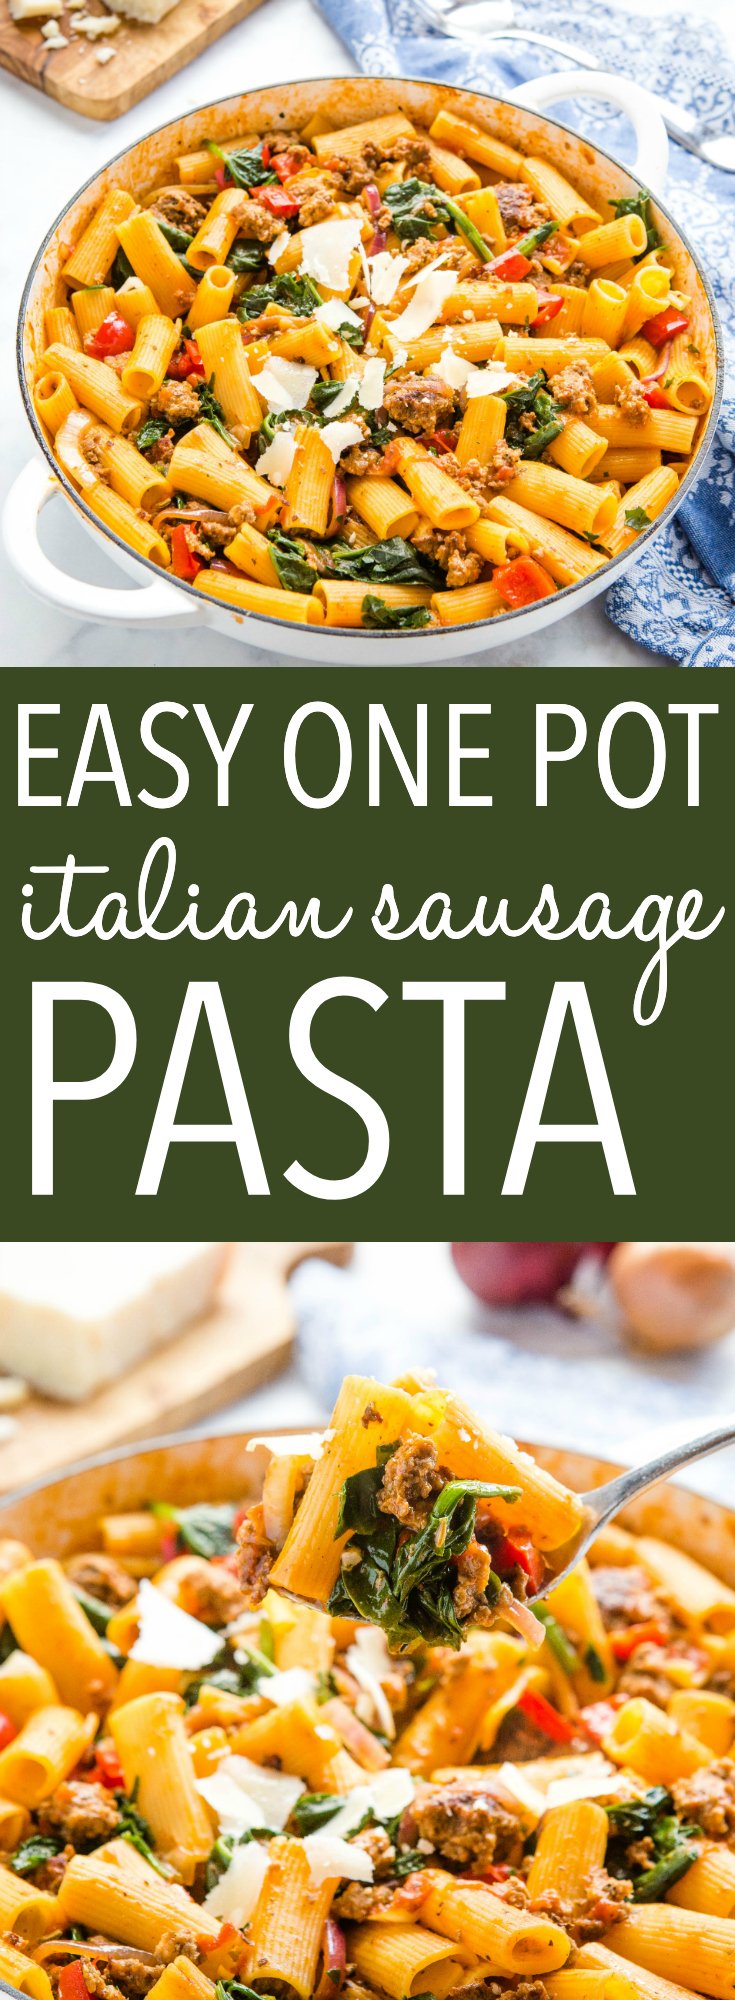 This Easy One Pot Italian Sausage Pasta is the perfect simple meaty all-in-one meal that's packed with classic flavours and on the table in 30 minutes or less! Recipe from thebusybaker.ca! #recipe #italiansausage #pasta #onepotpasta #easymeal #easydinner #supper #dinner #family #weeknightmeal via @busybakerblog